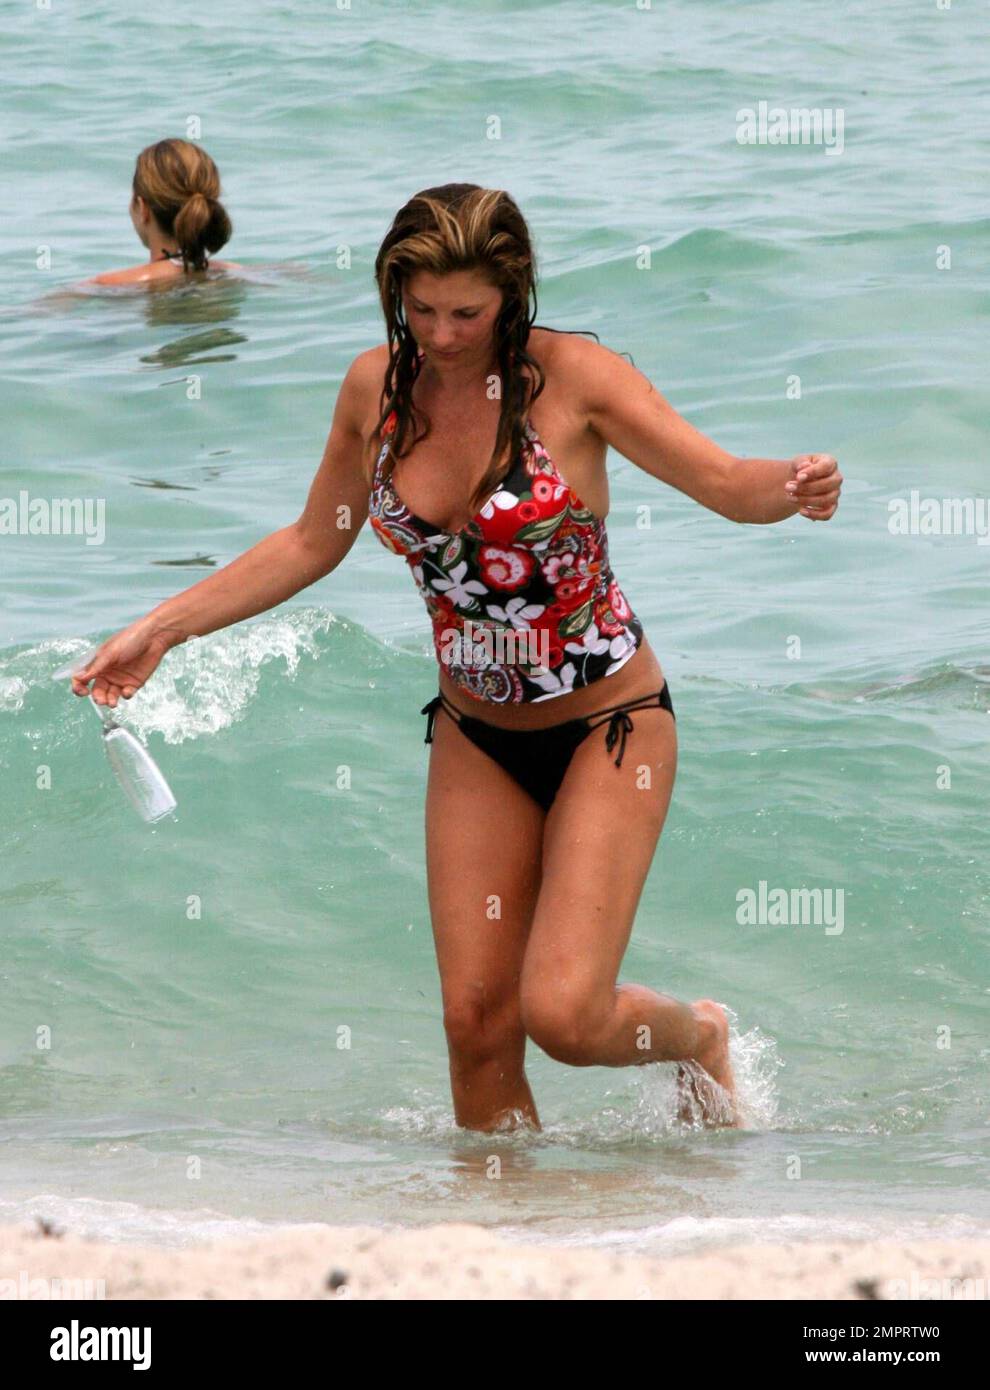 Exclusive!! Hot Latina model and actress Daisy Fuentes enjoys some  champagne and pizza on Miami Beach with friends and family. Miami Beach,  Fla. 6/24/07 Stock Photo - Alamy